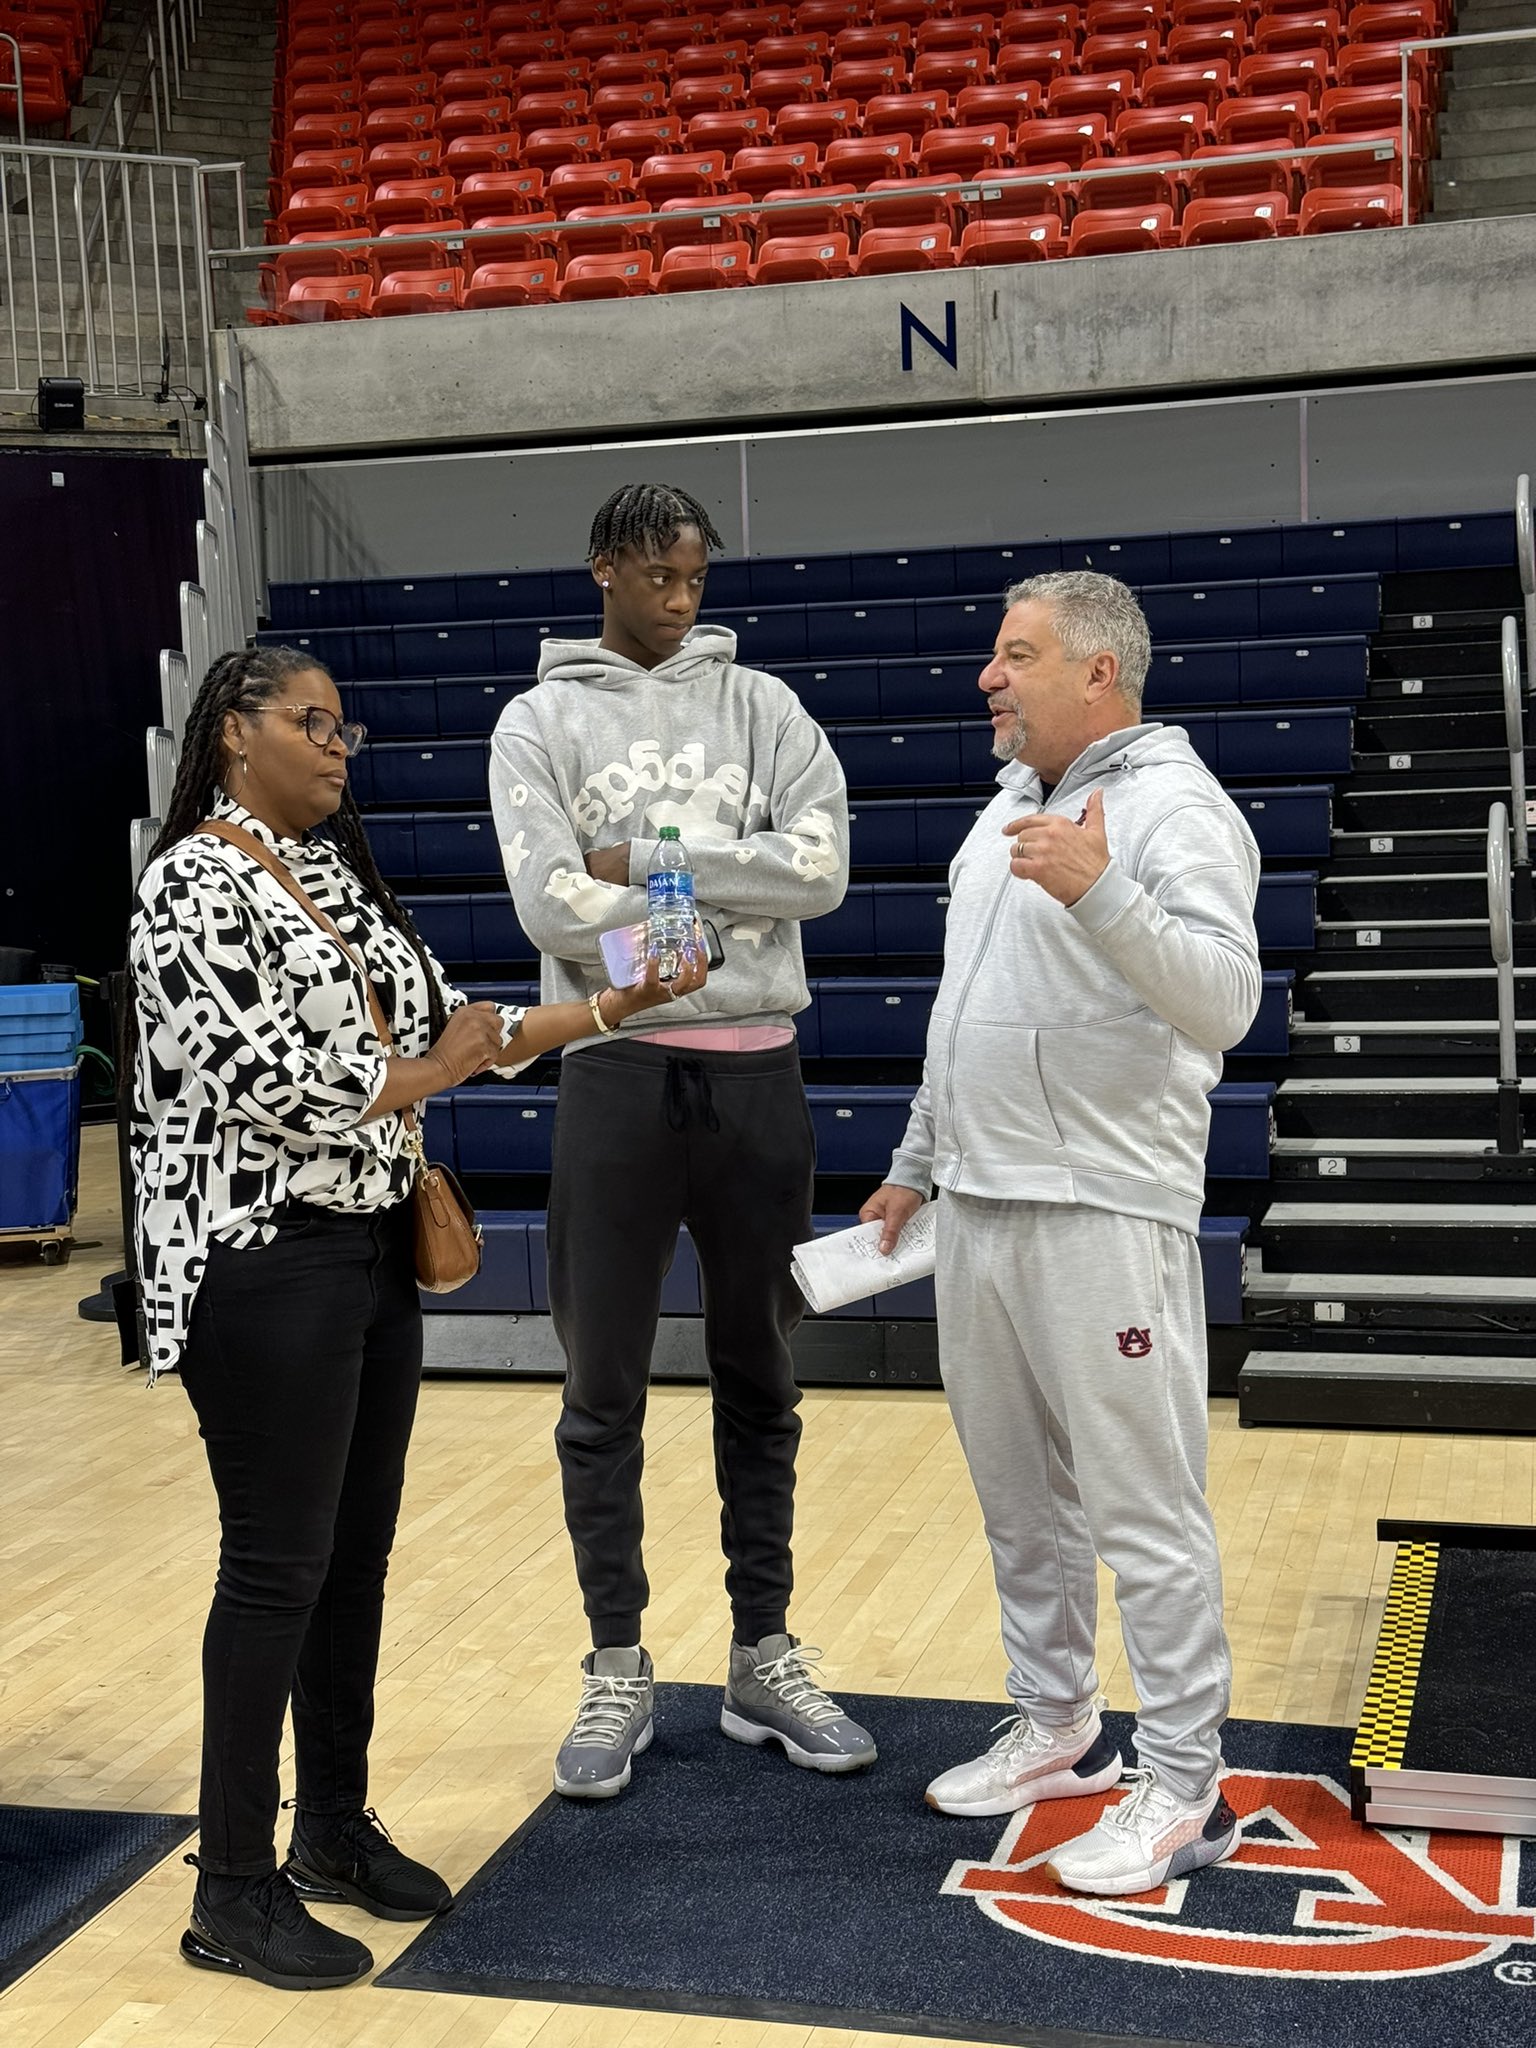 A.J. Dybantsa, No. 1 in 2025, arrives at Auburn for visit, speaks with Charles Barkley